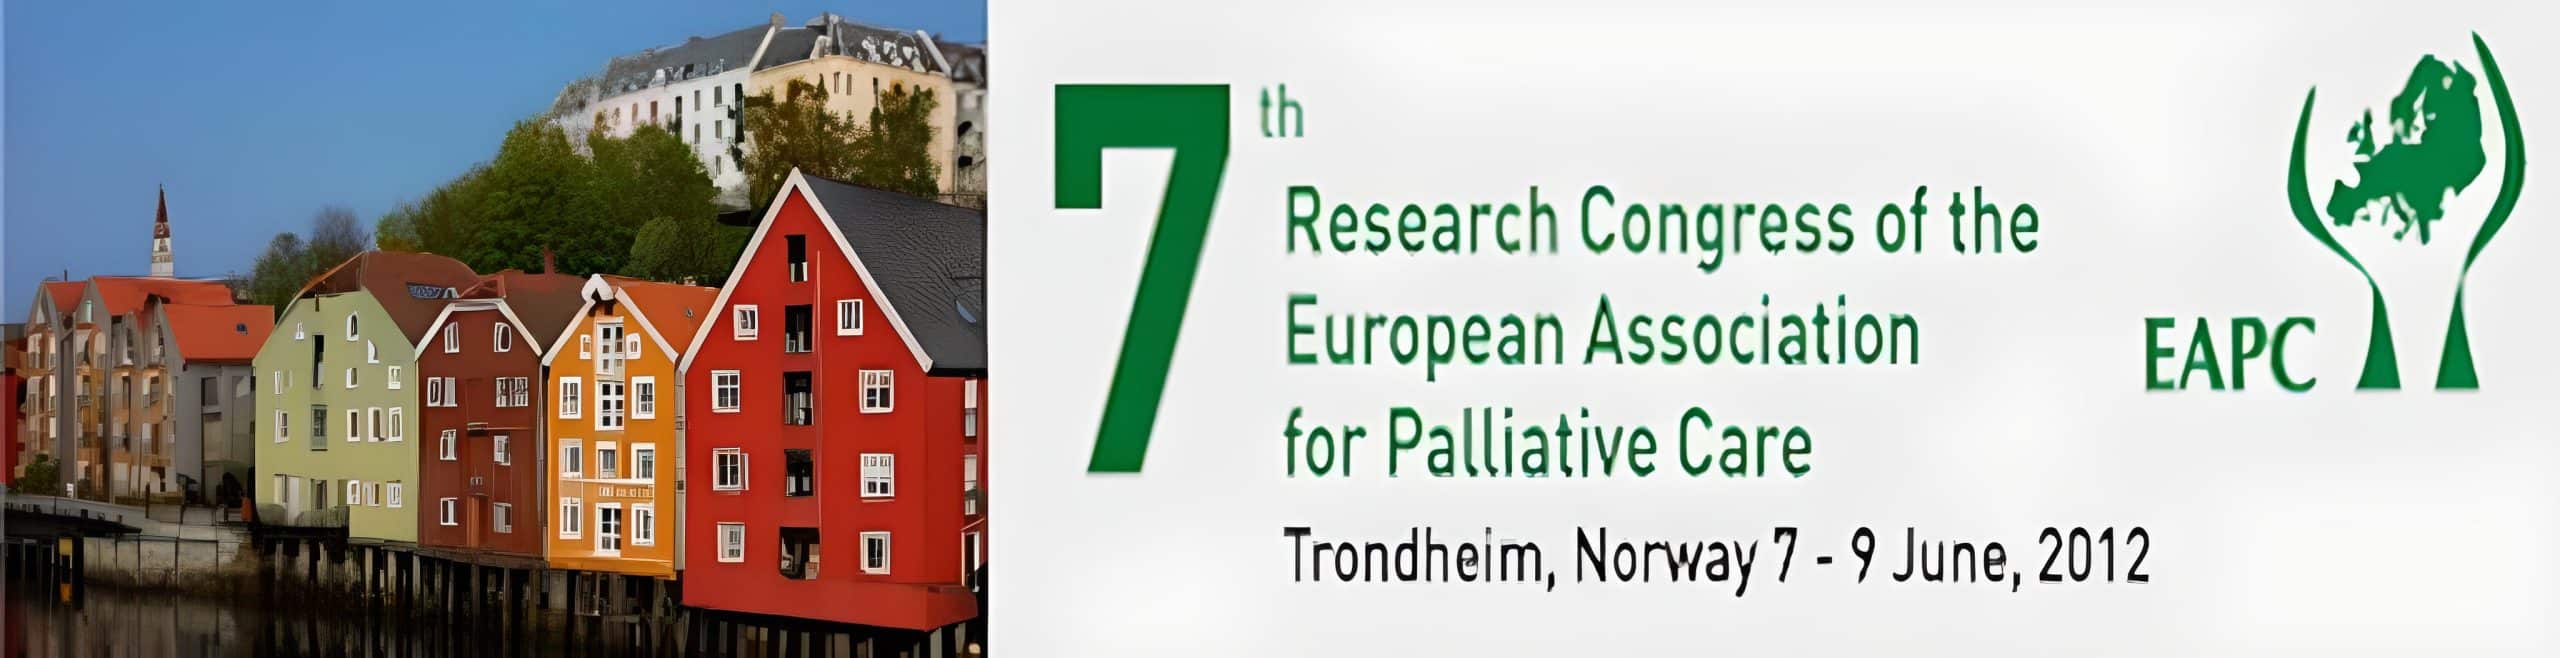 banner 7th research congress of the EAPC Trondheim 7-9 june 2012